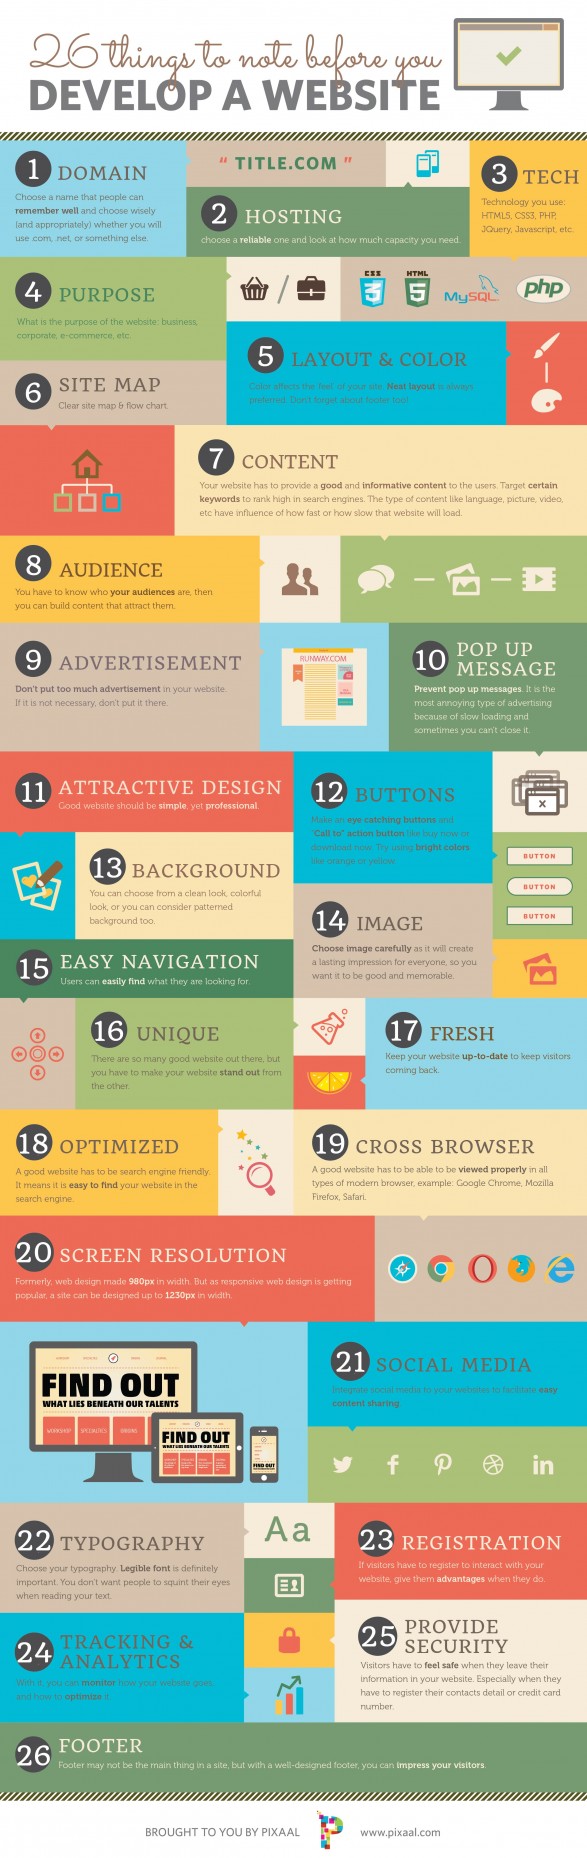 26 Things to Note Before You Develop a Website